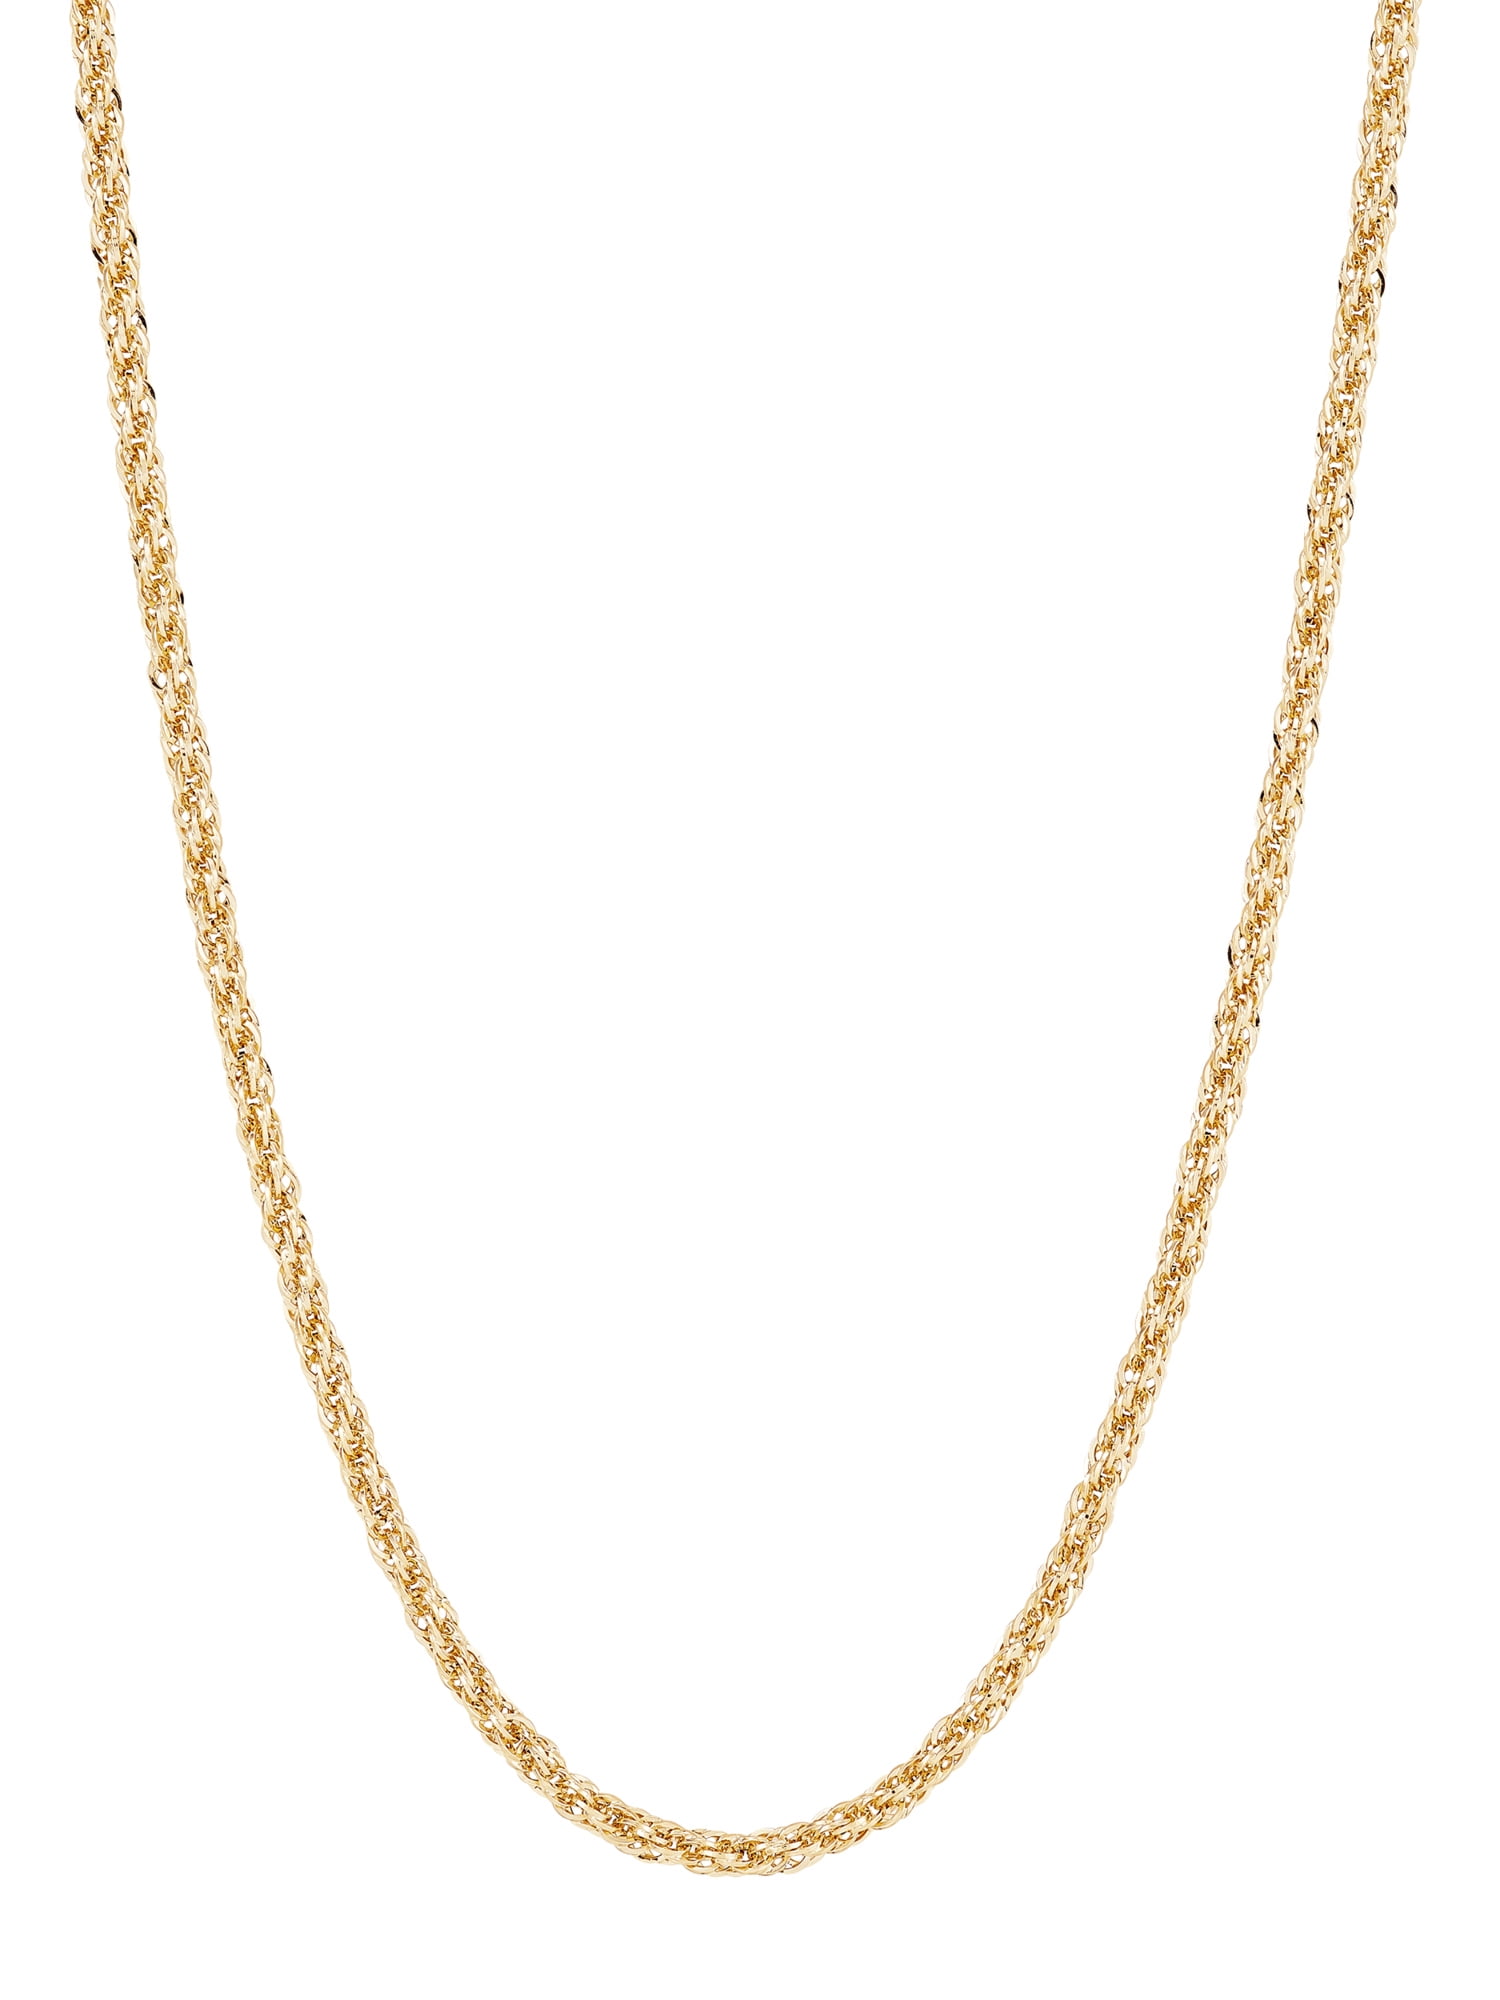 Brilliance Fine Jewelry 10K Yellow Gold Hollow Infinity 2.45MM Rope Chain Necklace, 18"